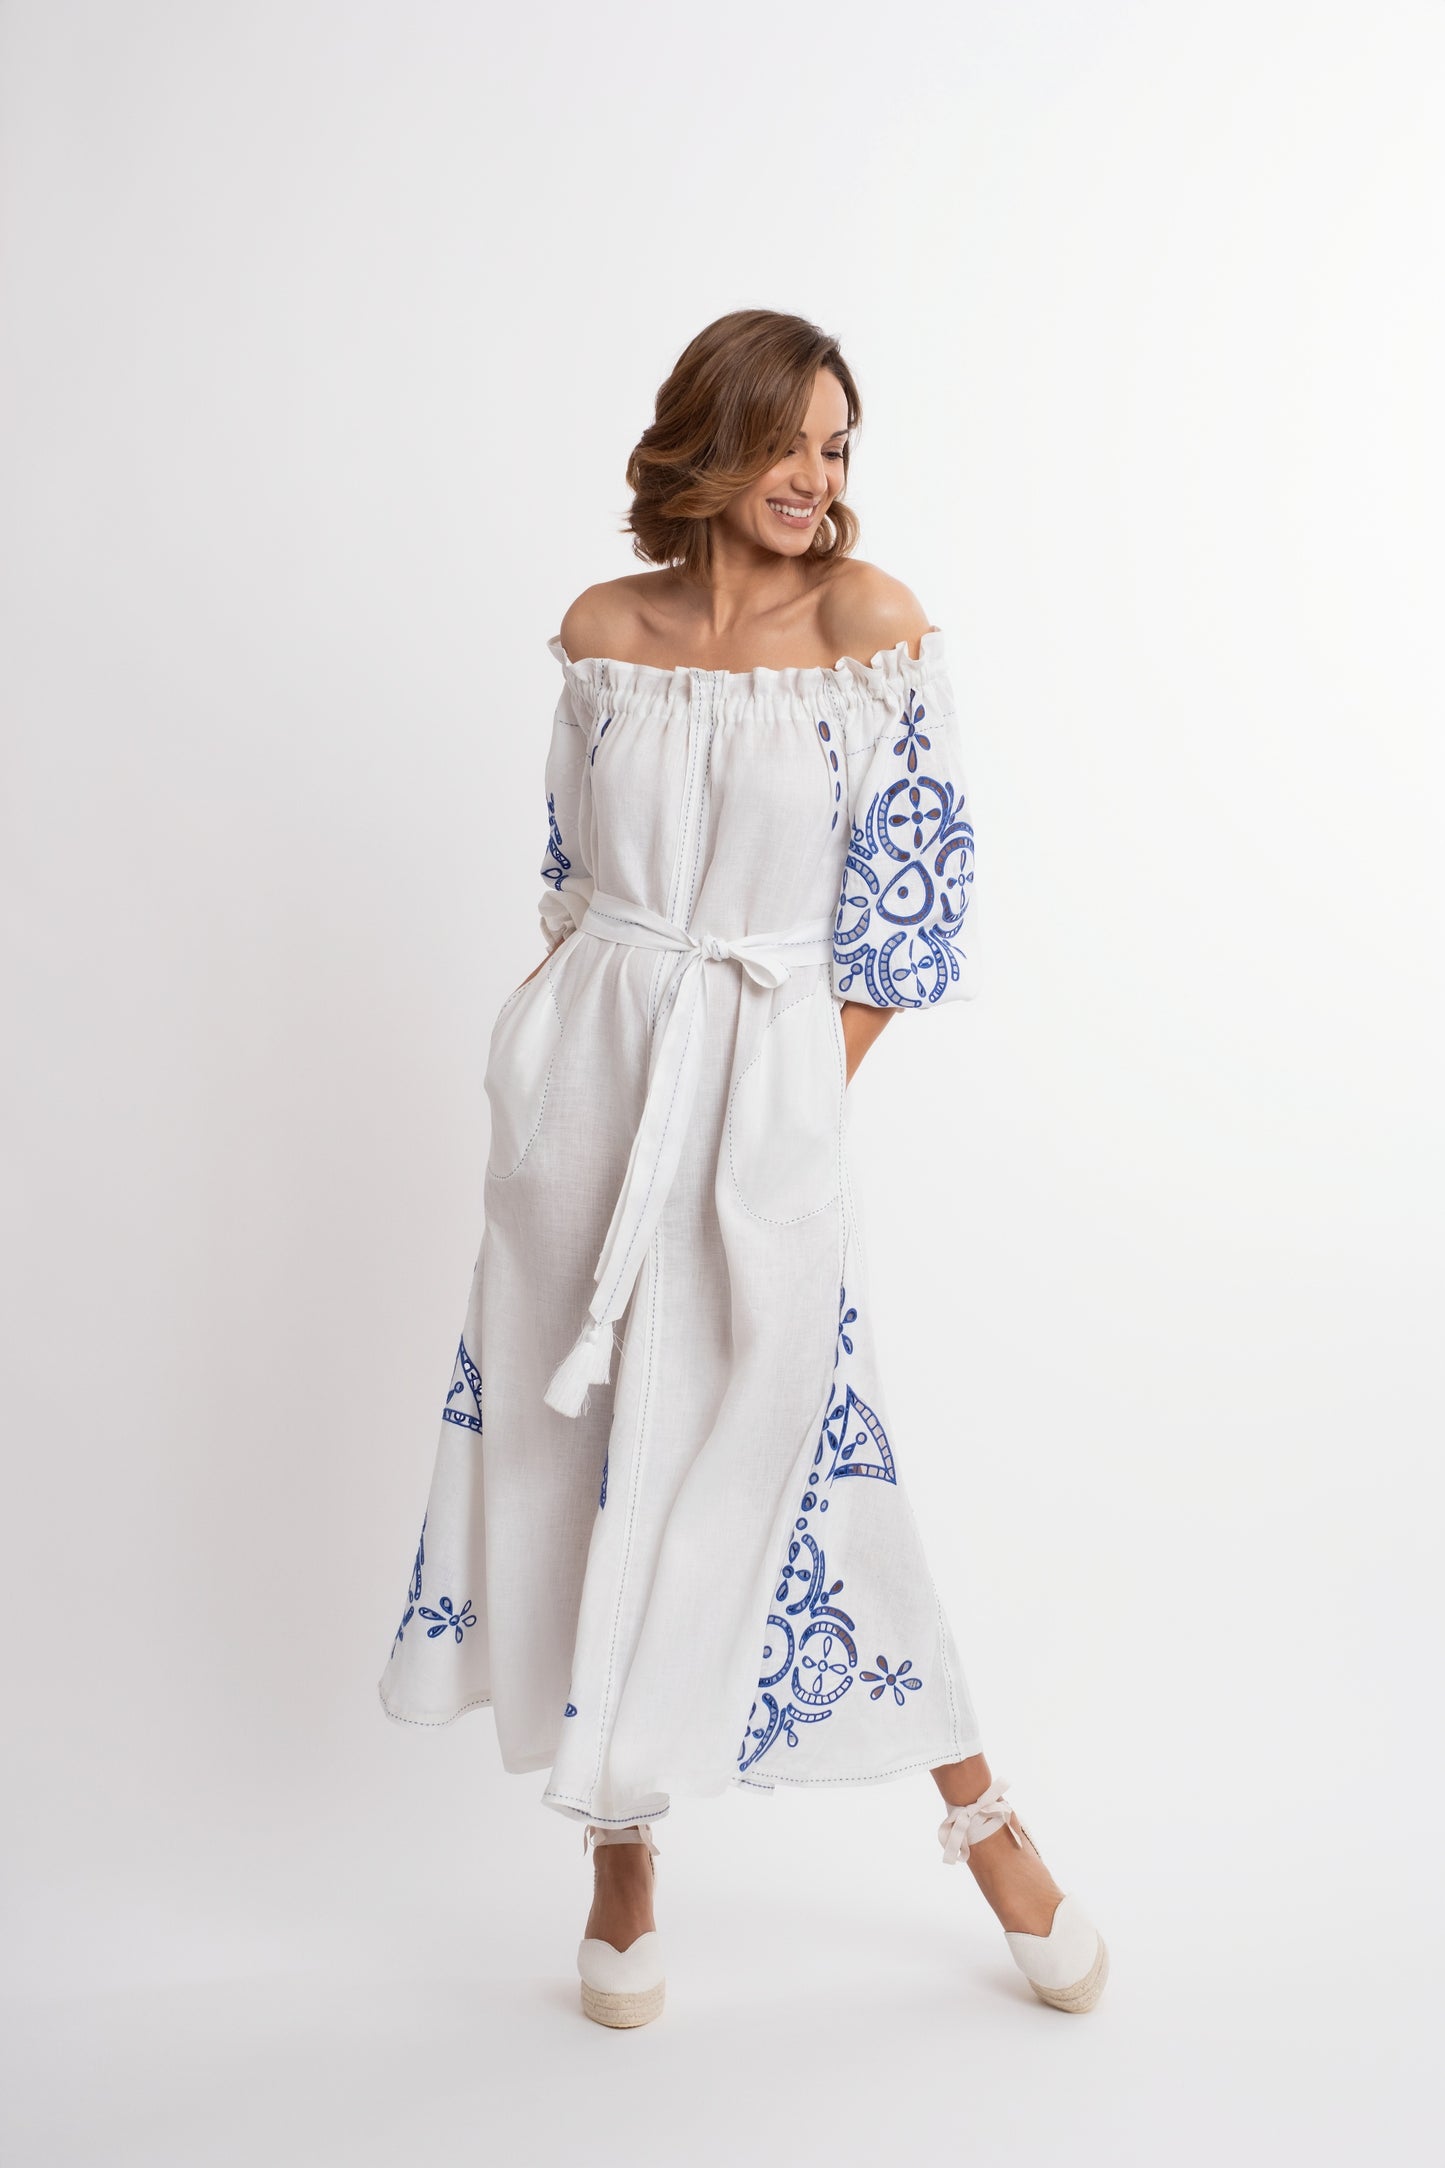 Mikonos: White  boat-neck linen belted dress embroidered in royal blue.